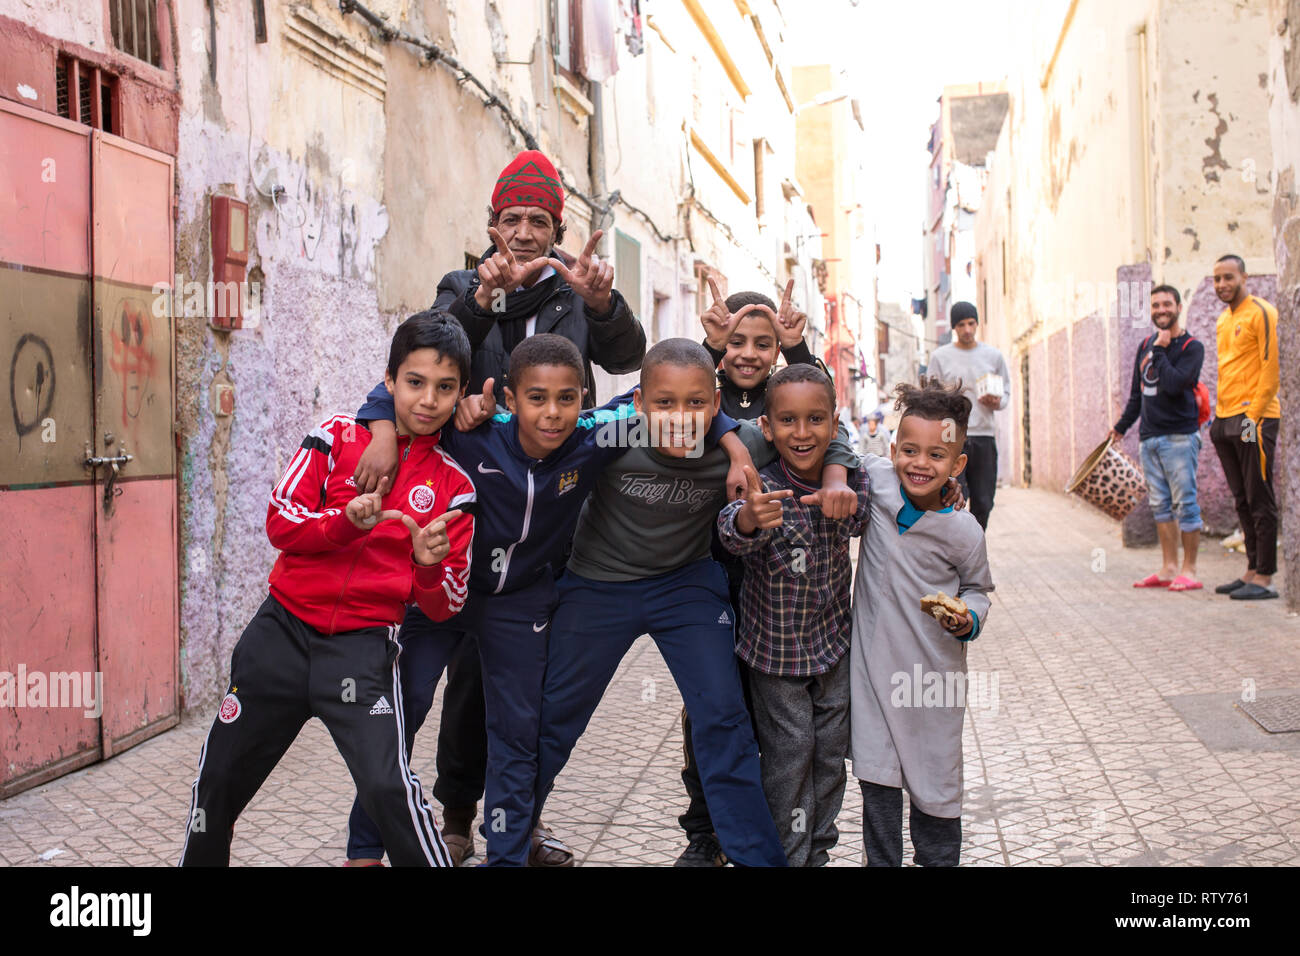 CASABLANCA, MOROCCO - MARCH 2, 2019:   People on the streets of Old Medina in Casablanca, Morocco. Stock Photo